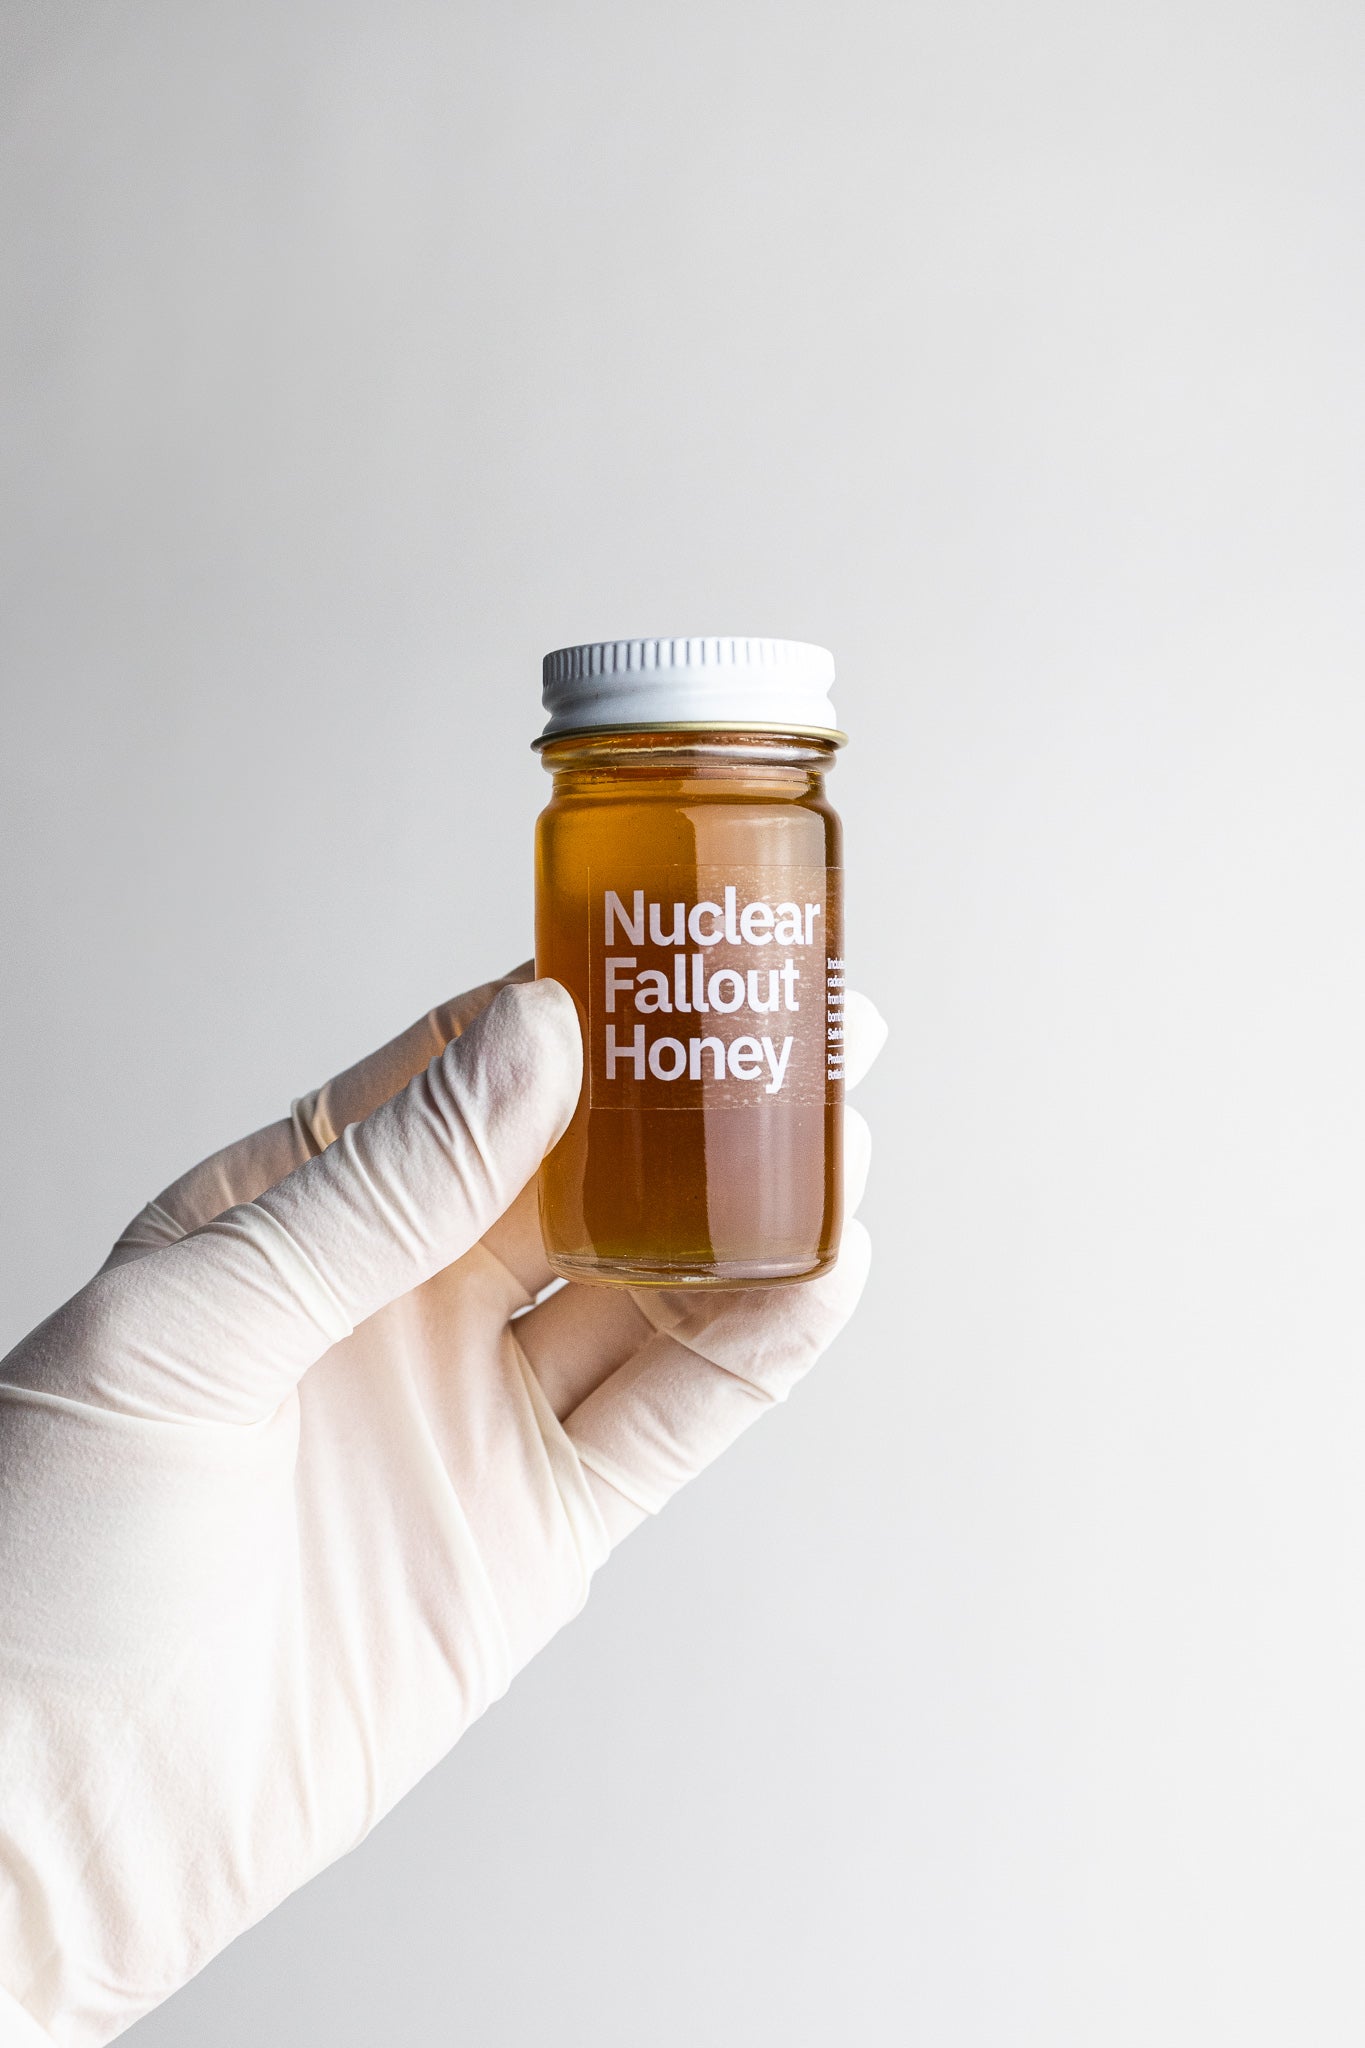 Nuclear Fallout Honey - Stemcell Science Shop